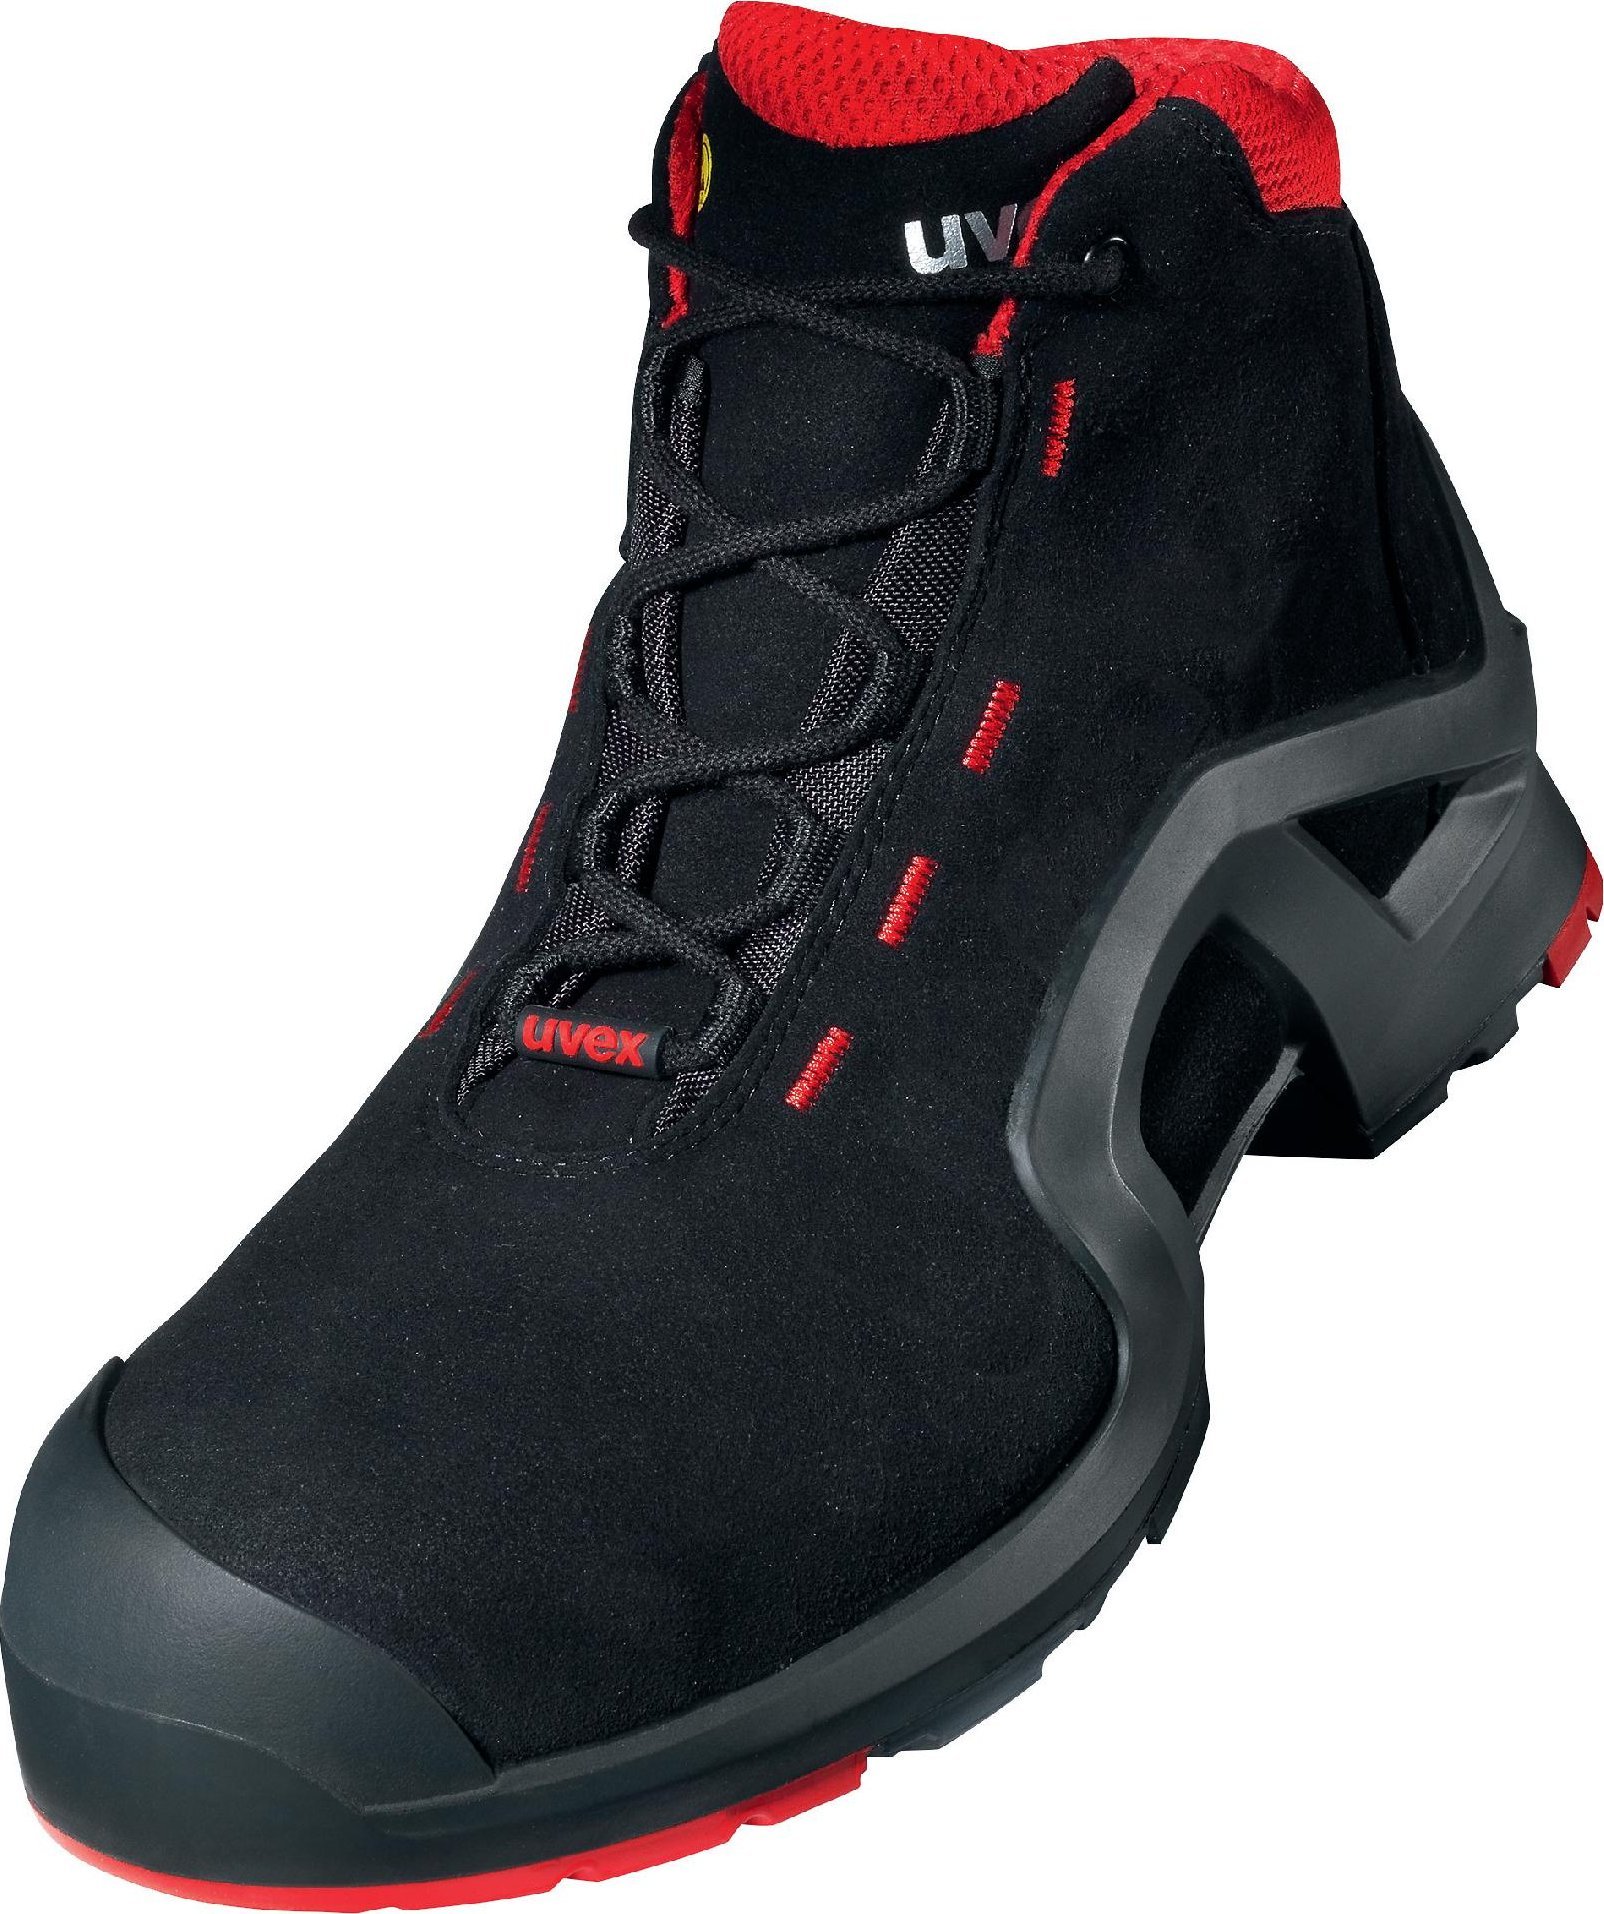 Фото - Засоби захисту UVEX 1 x-tended support S3 SRC lace-up boot size 42 